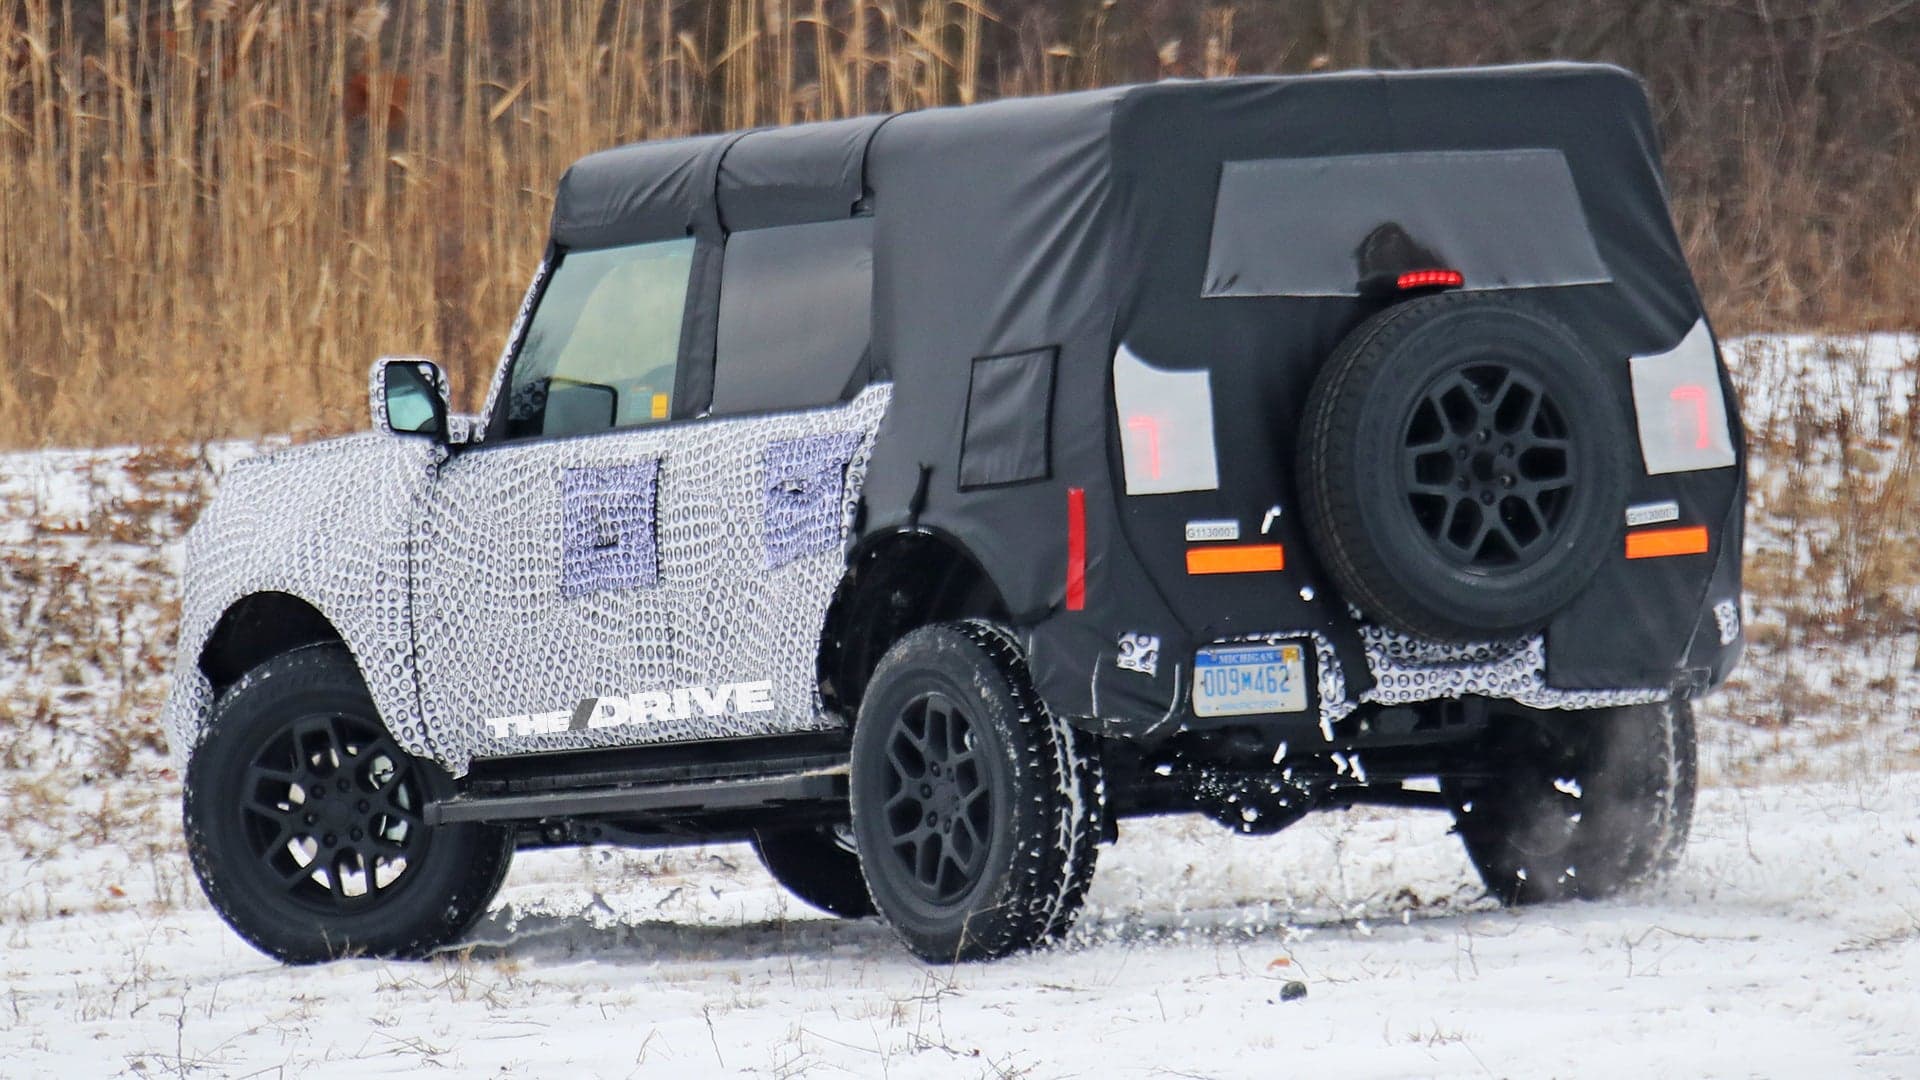 First Photos of Real 2021 Ford Bronco Appear to Confirm Removable Doors, Roof